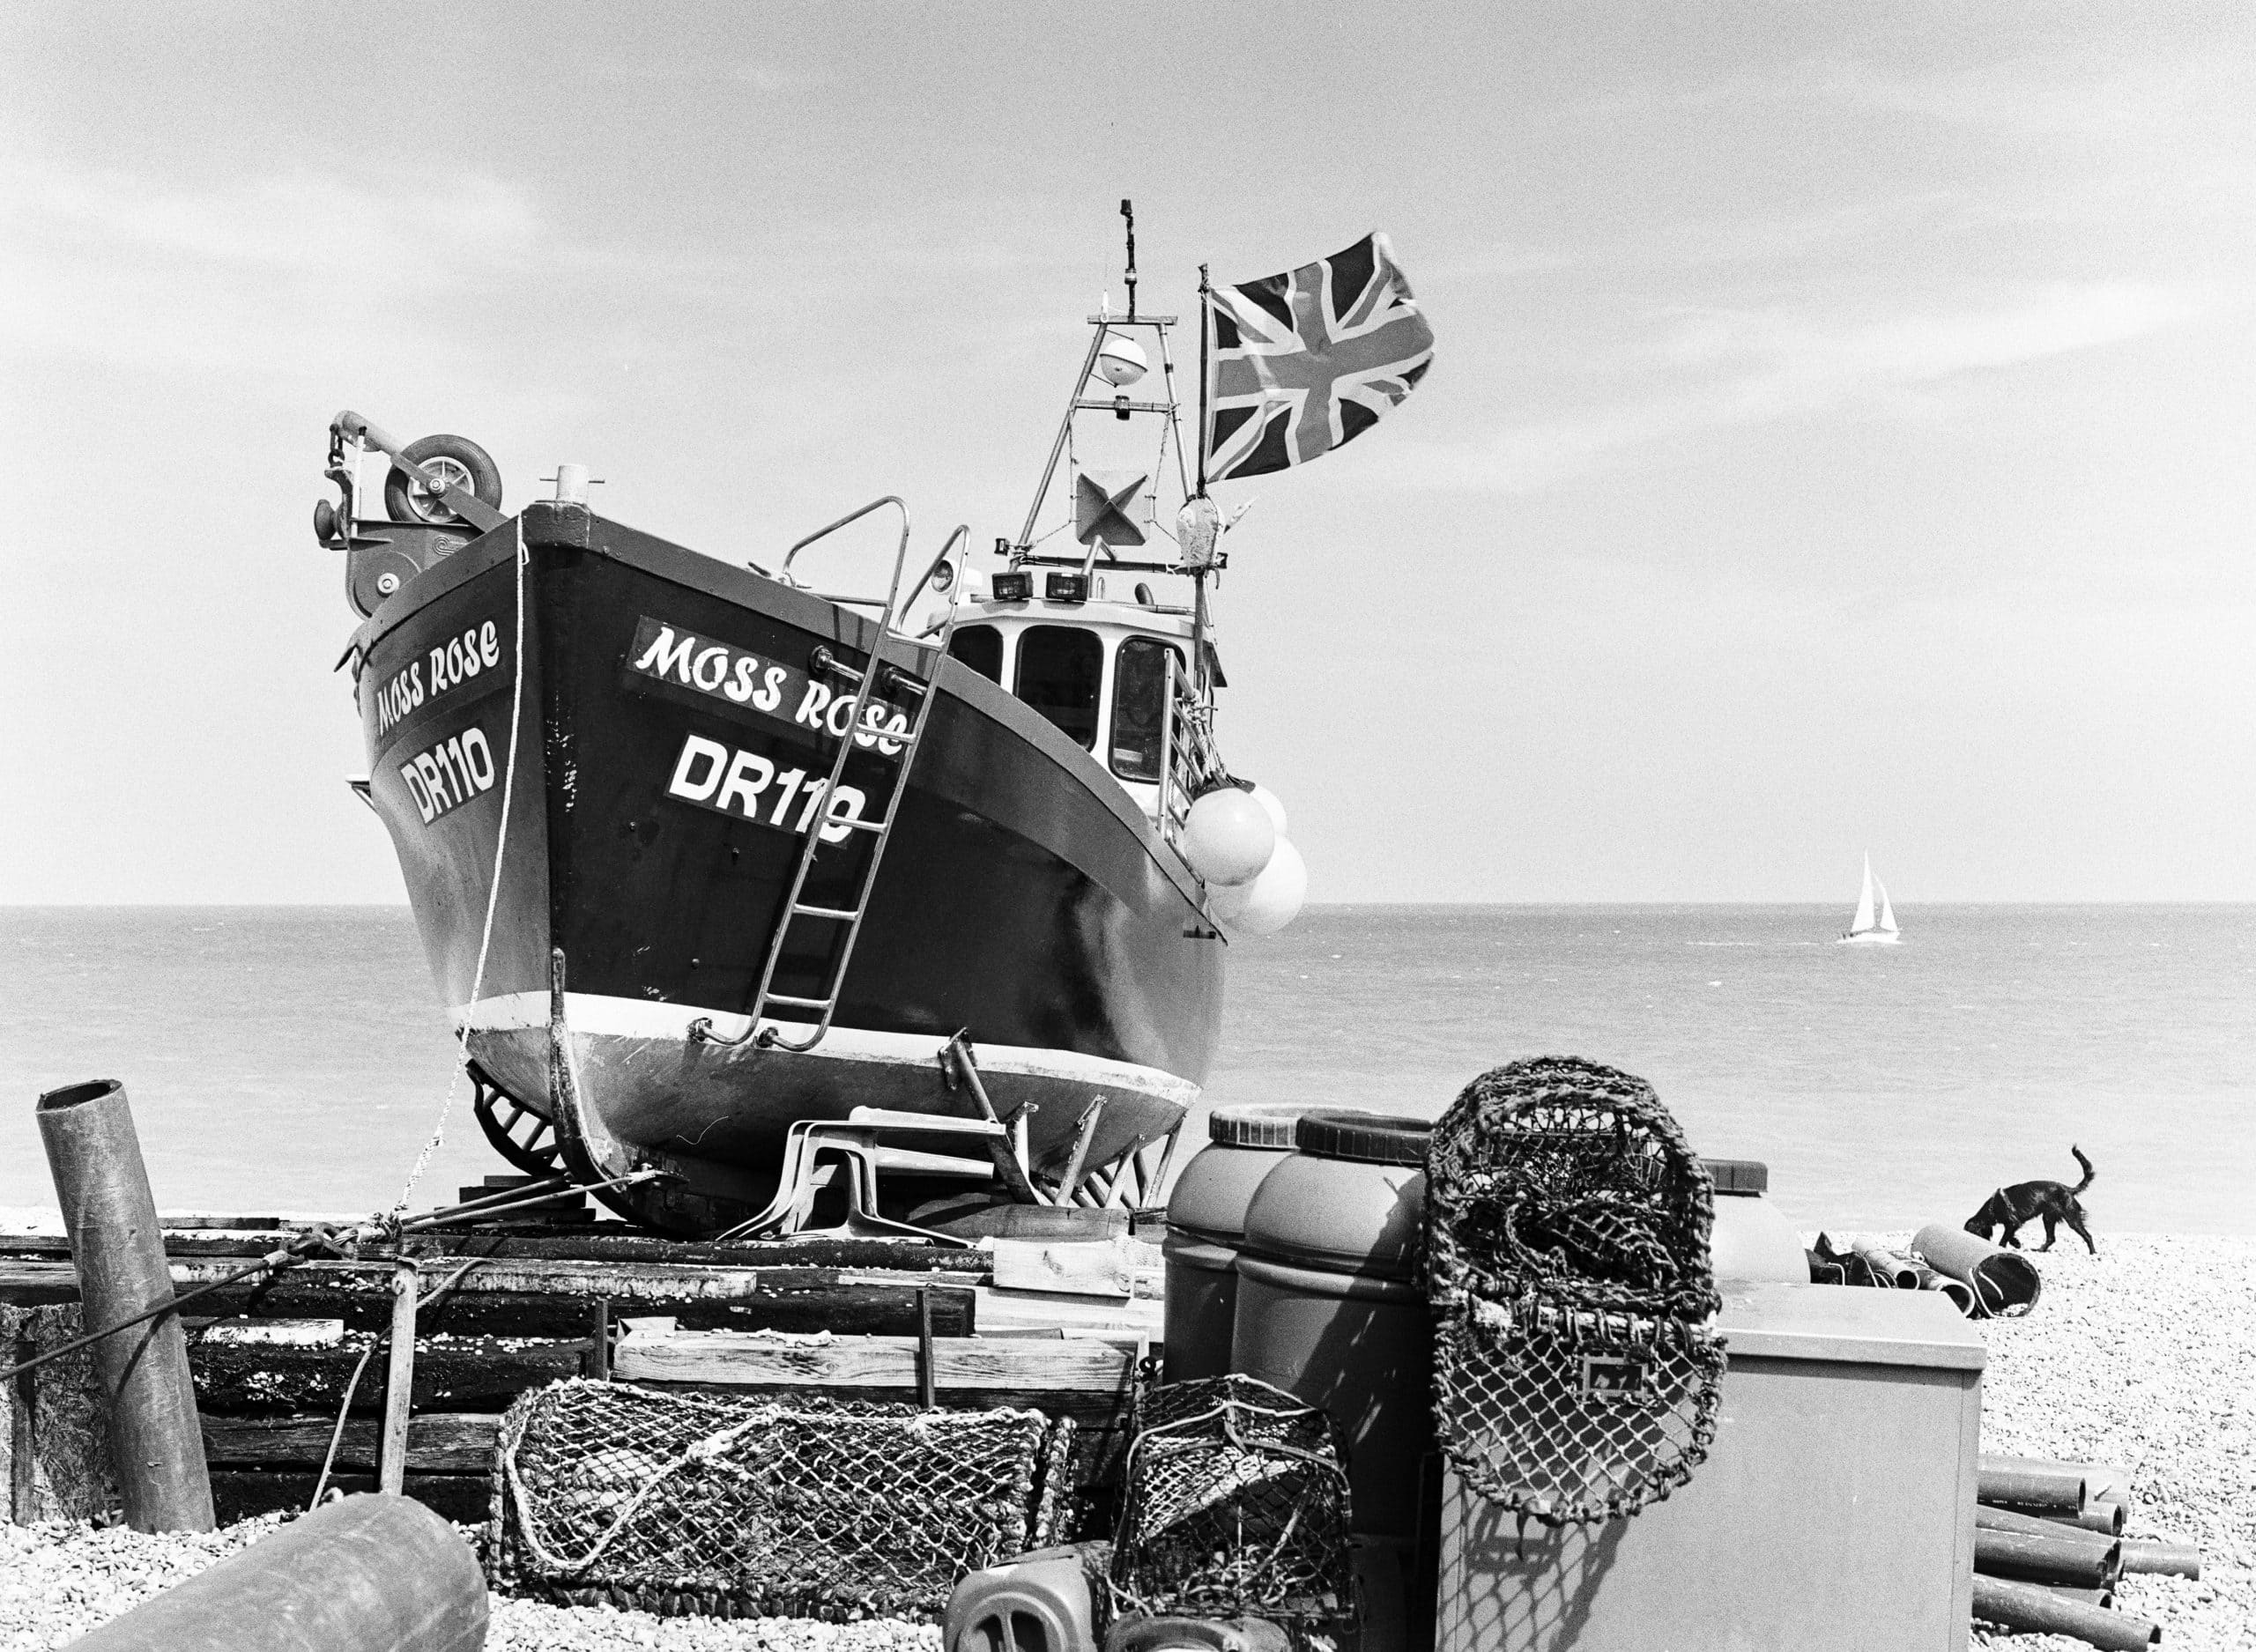 Boats of Deal (Film) - A Flash Of Darkness